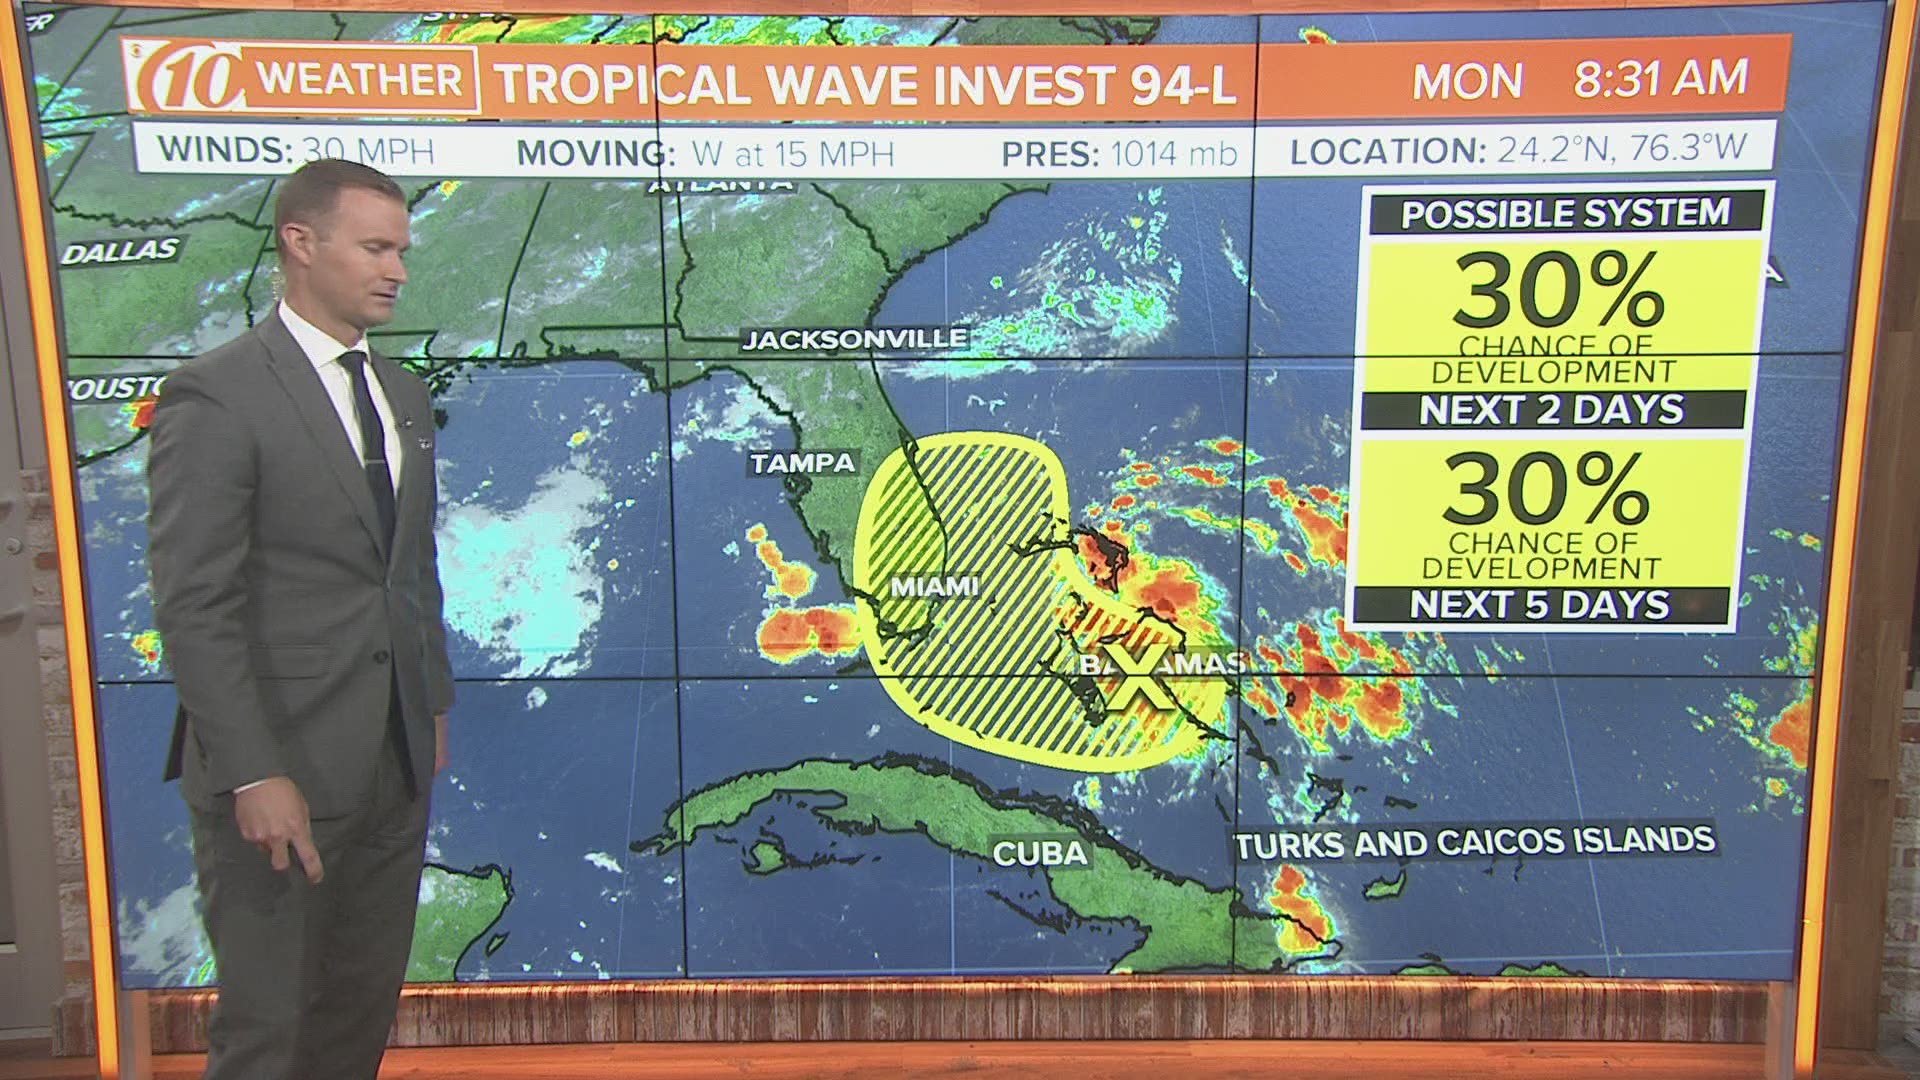 The National Hurricane Center and the 10Weather team are watching a tropical wave forecast to move closer to the Florida coast. https://on.wtsp.com/2M3HhTP